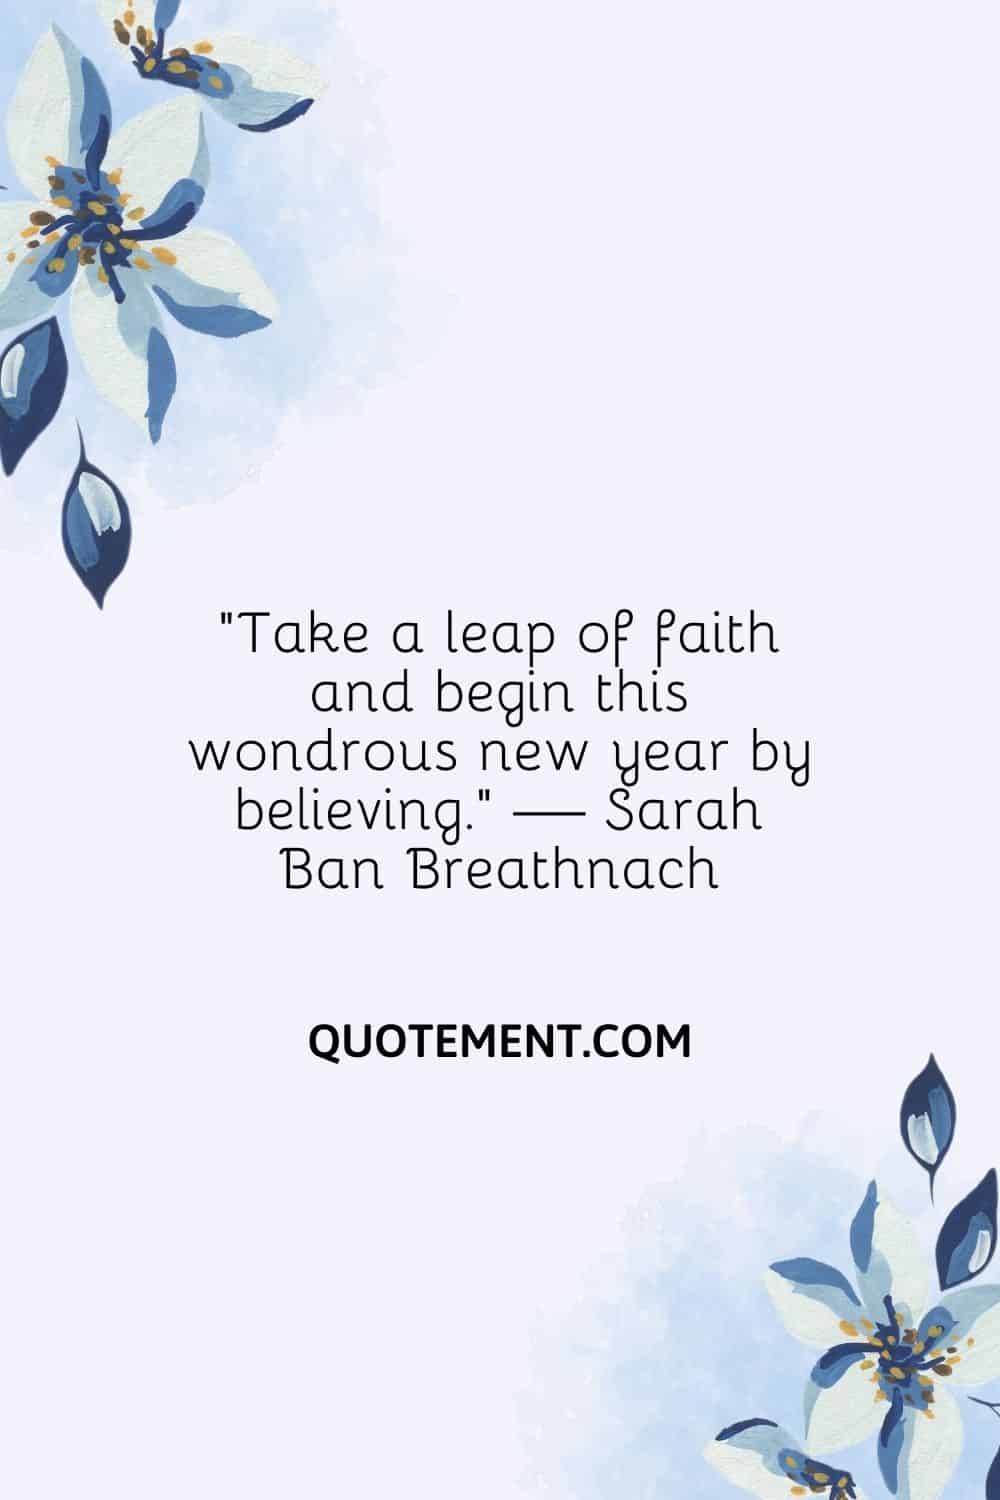 Take a leap of faith and begin this wondrous new year by believing